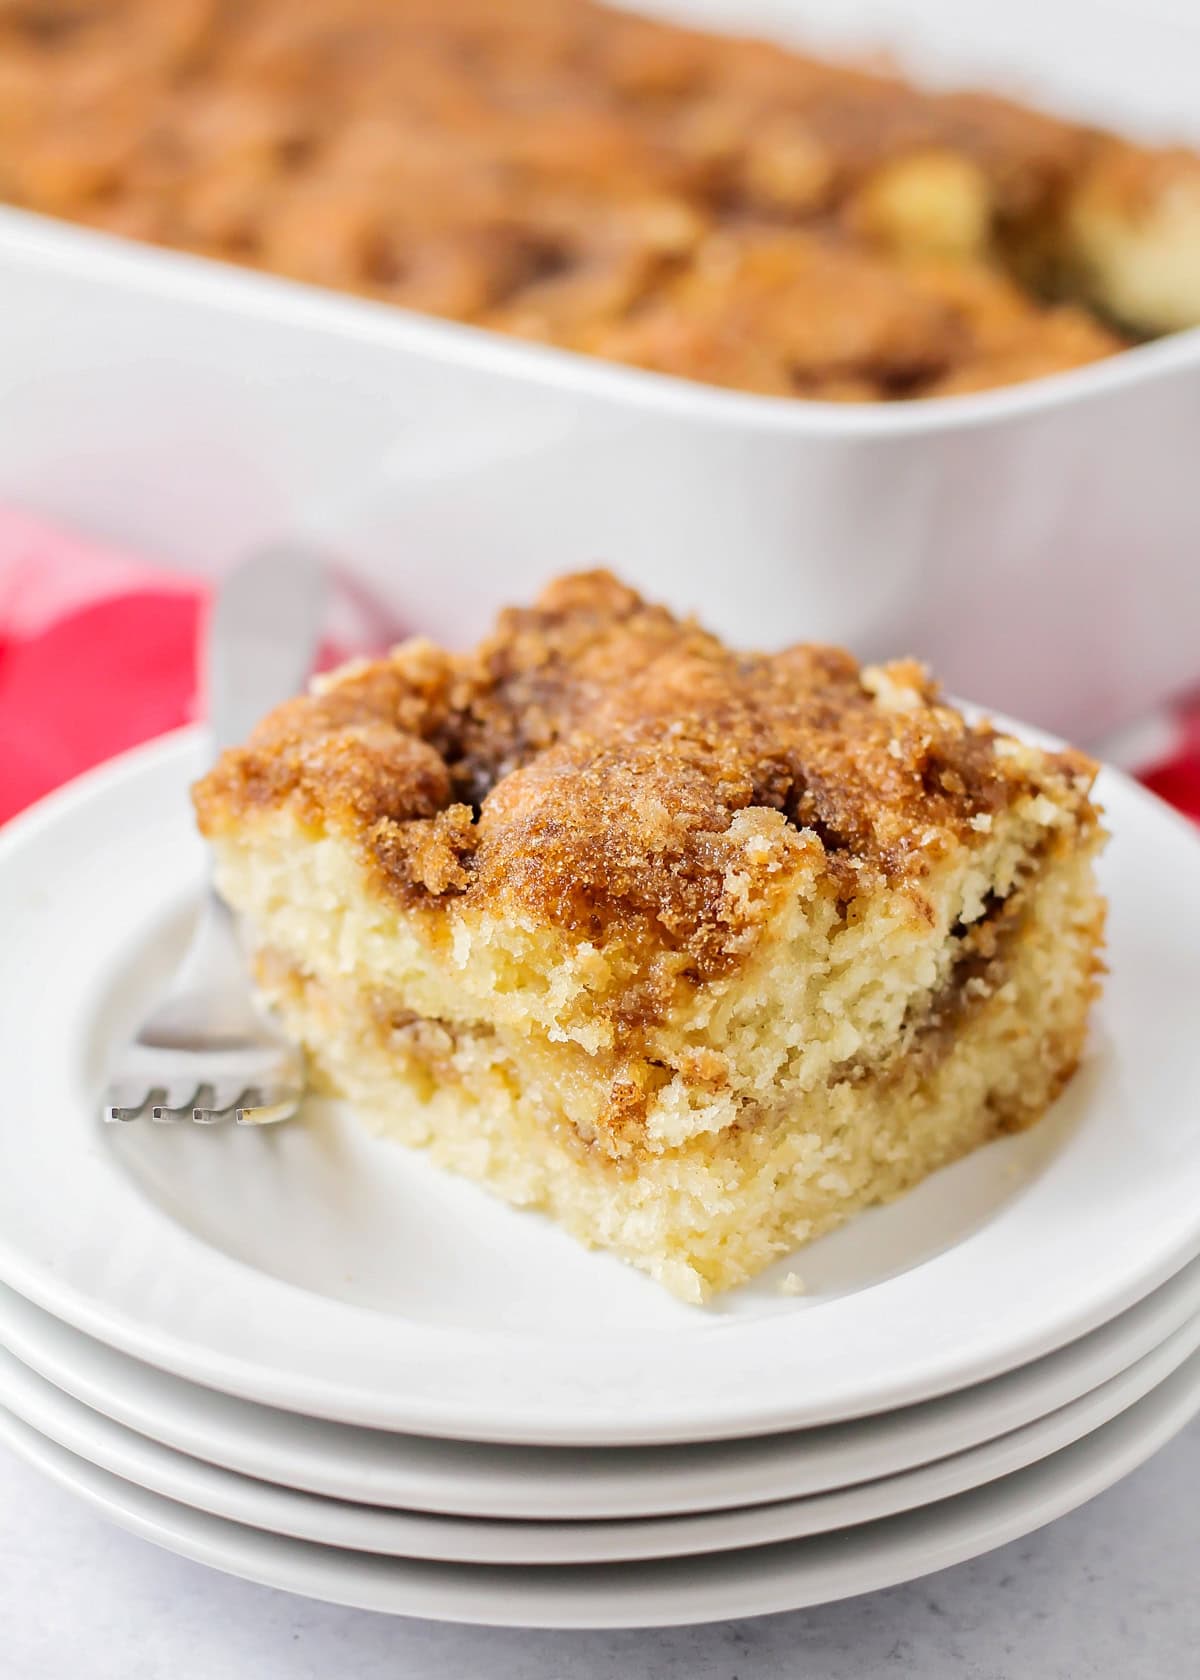 Coffee cake recipe slice on stack of white plates with fork.